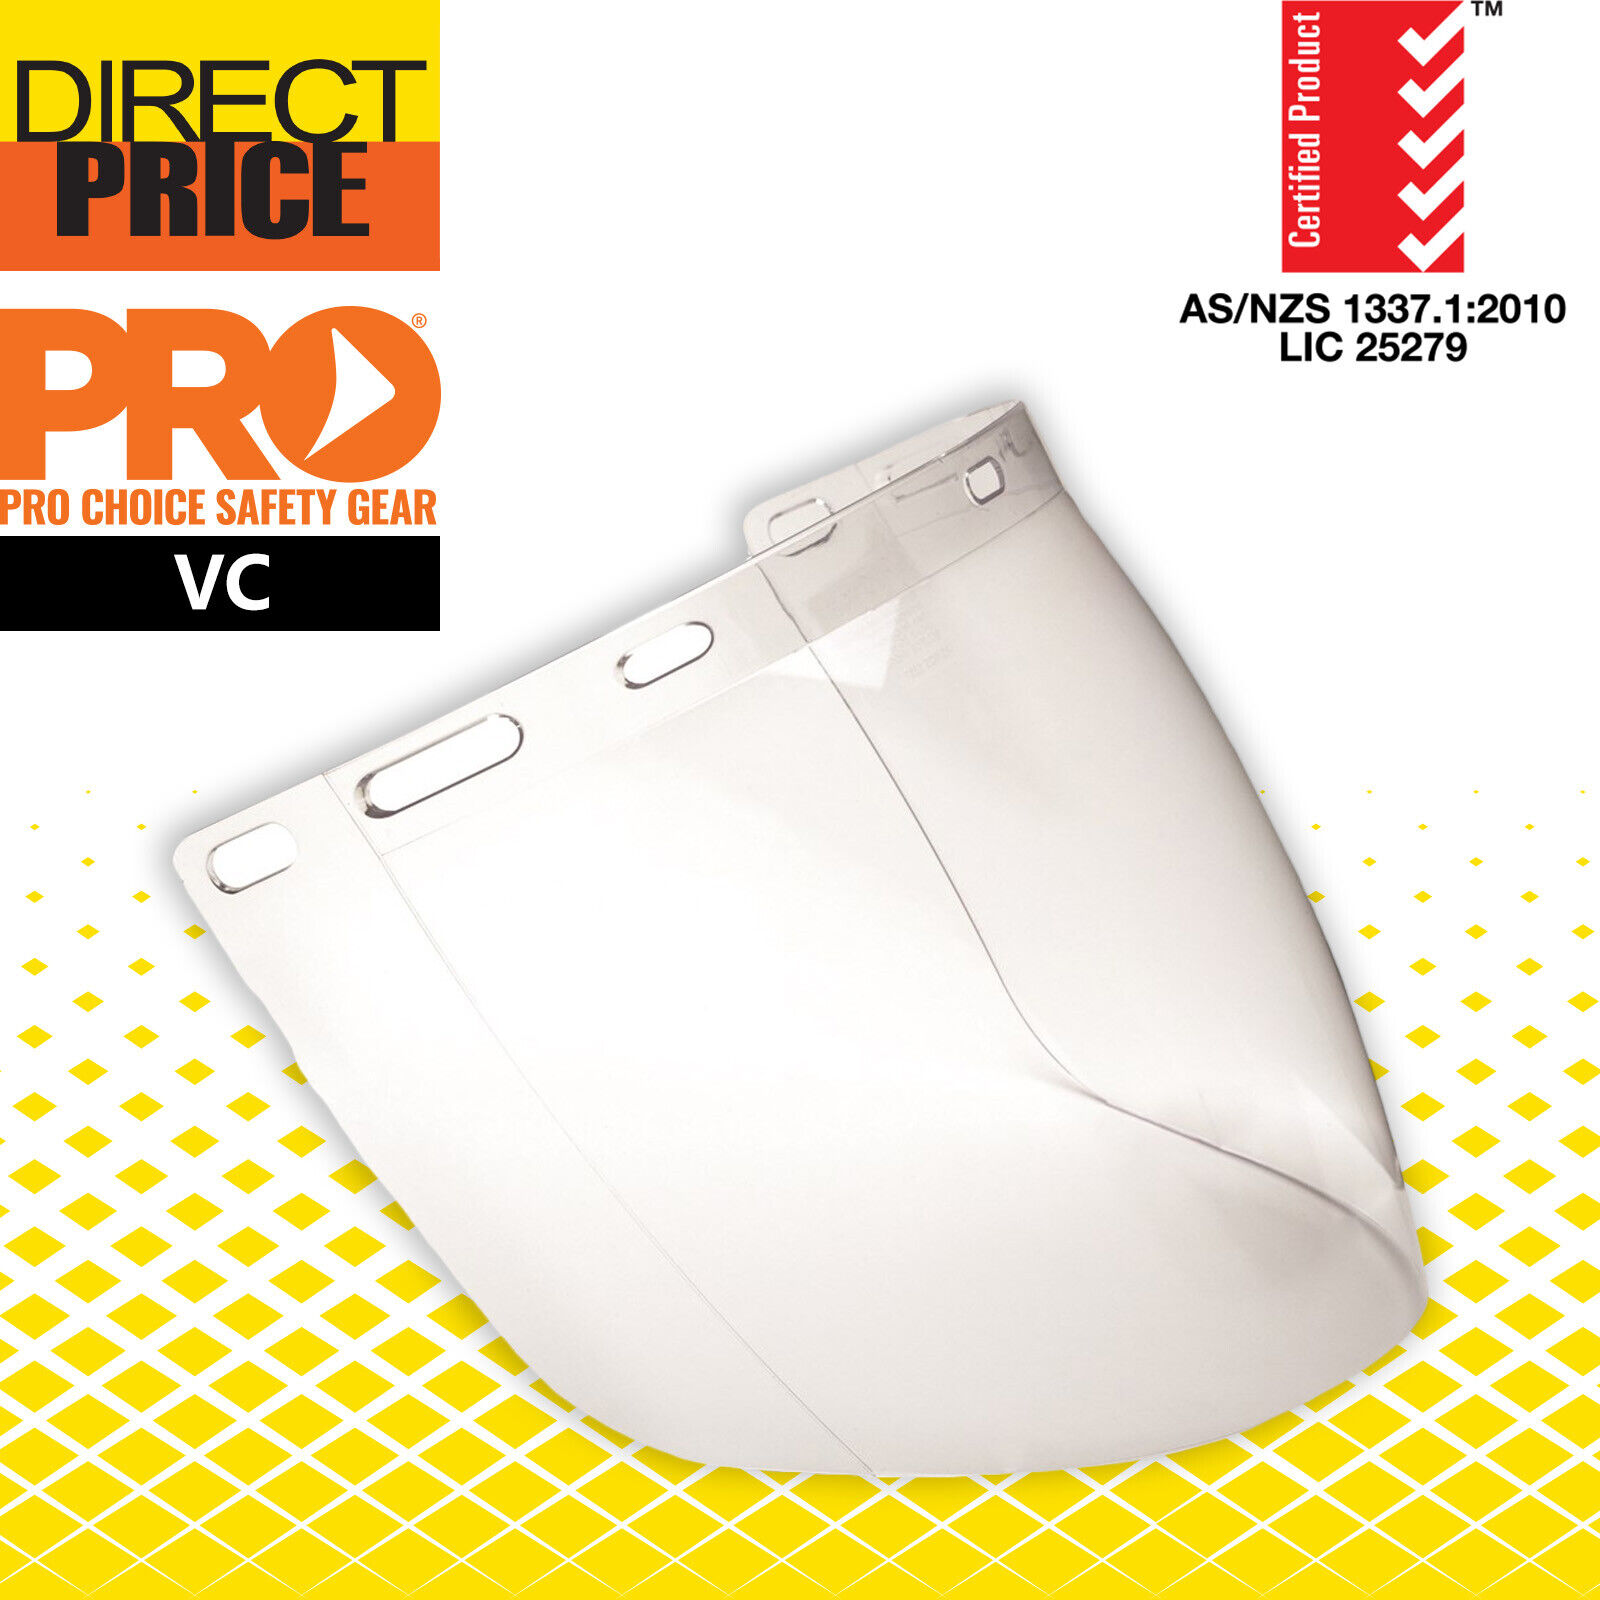 Pro Choice Striker Visor To Suit Pro Choice Safety Gear Browguards Clear, VC